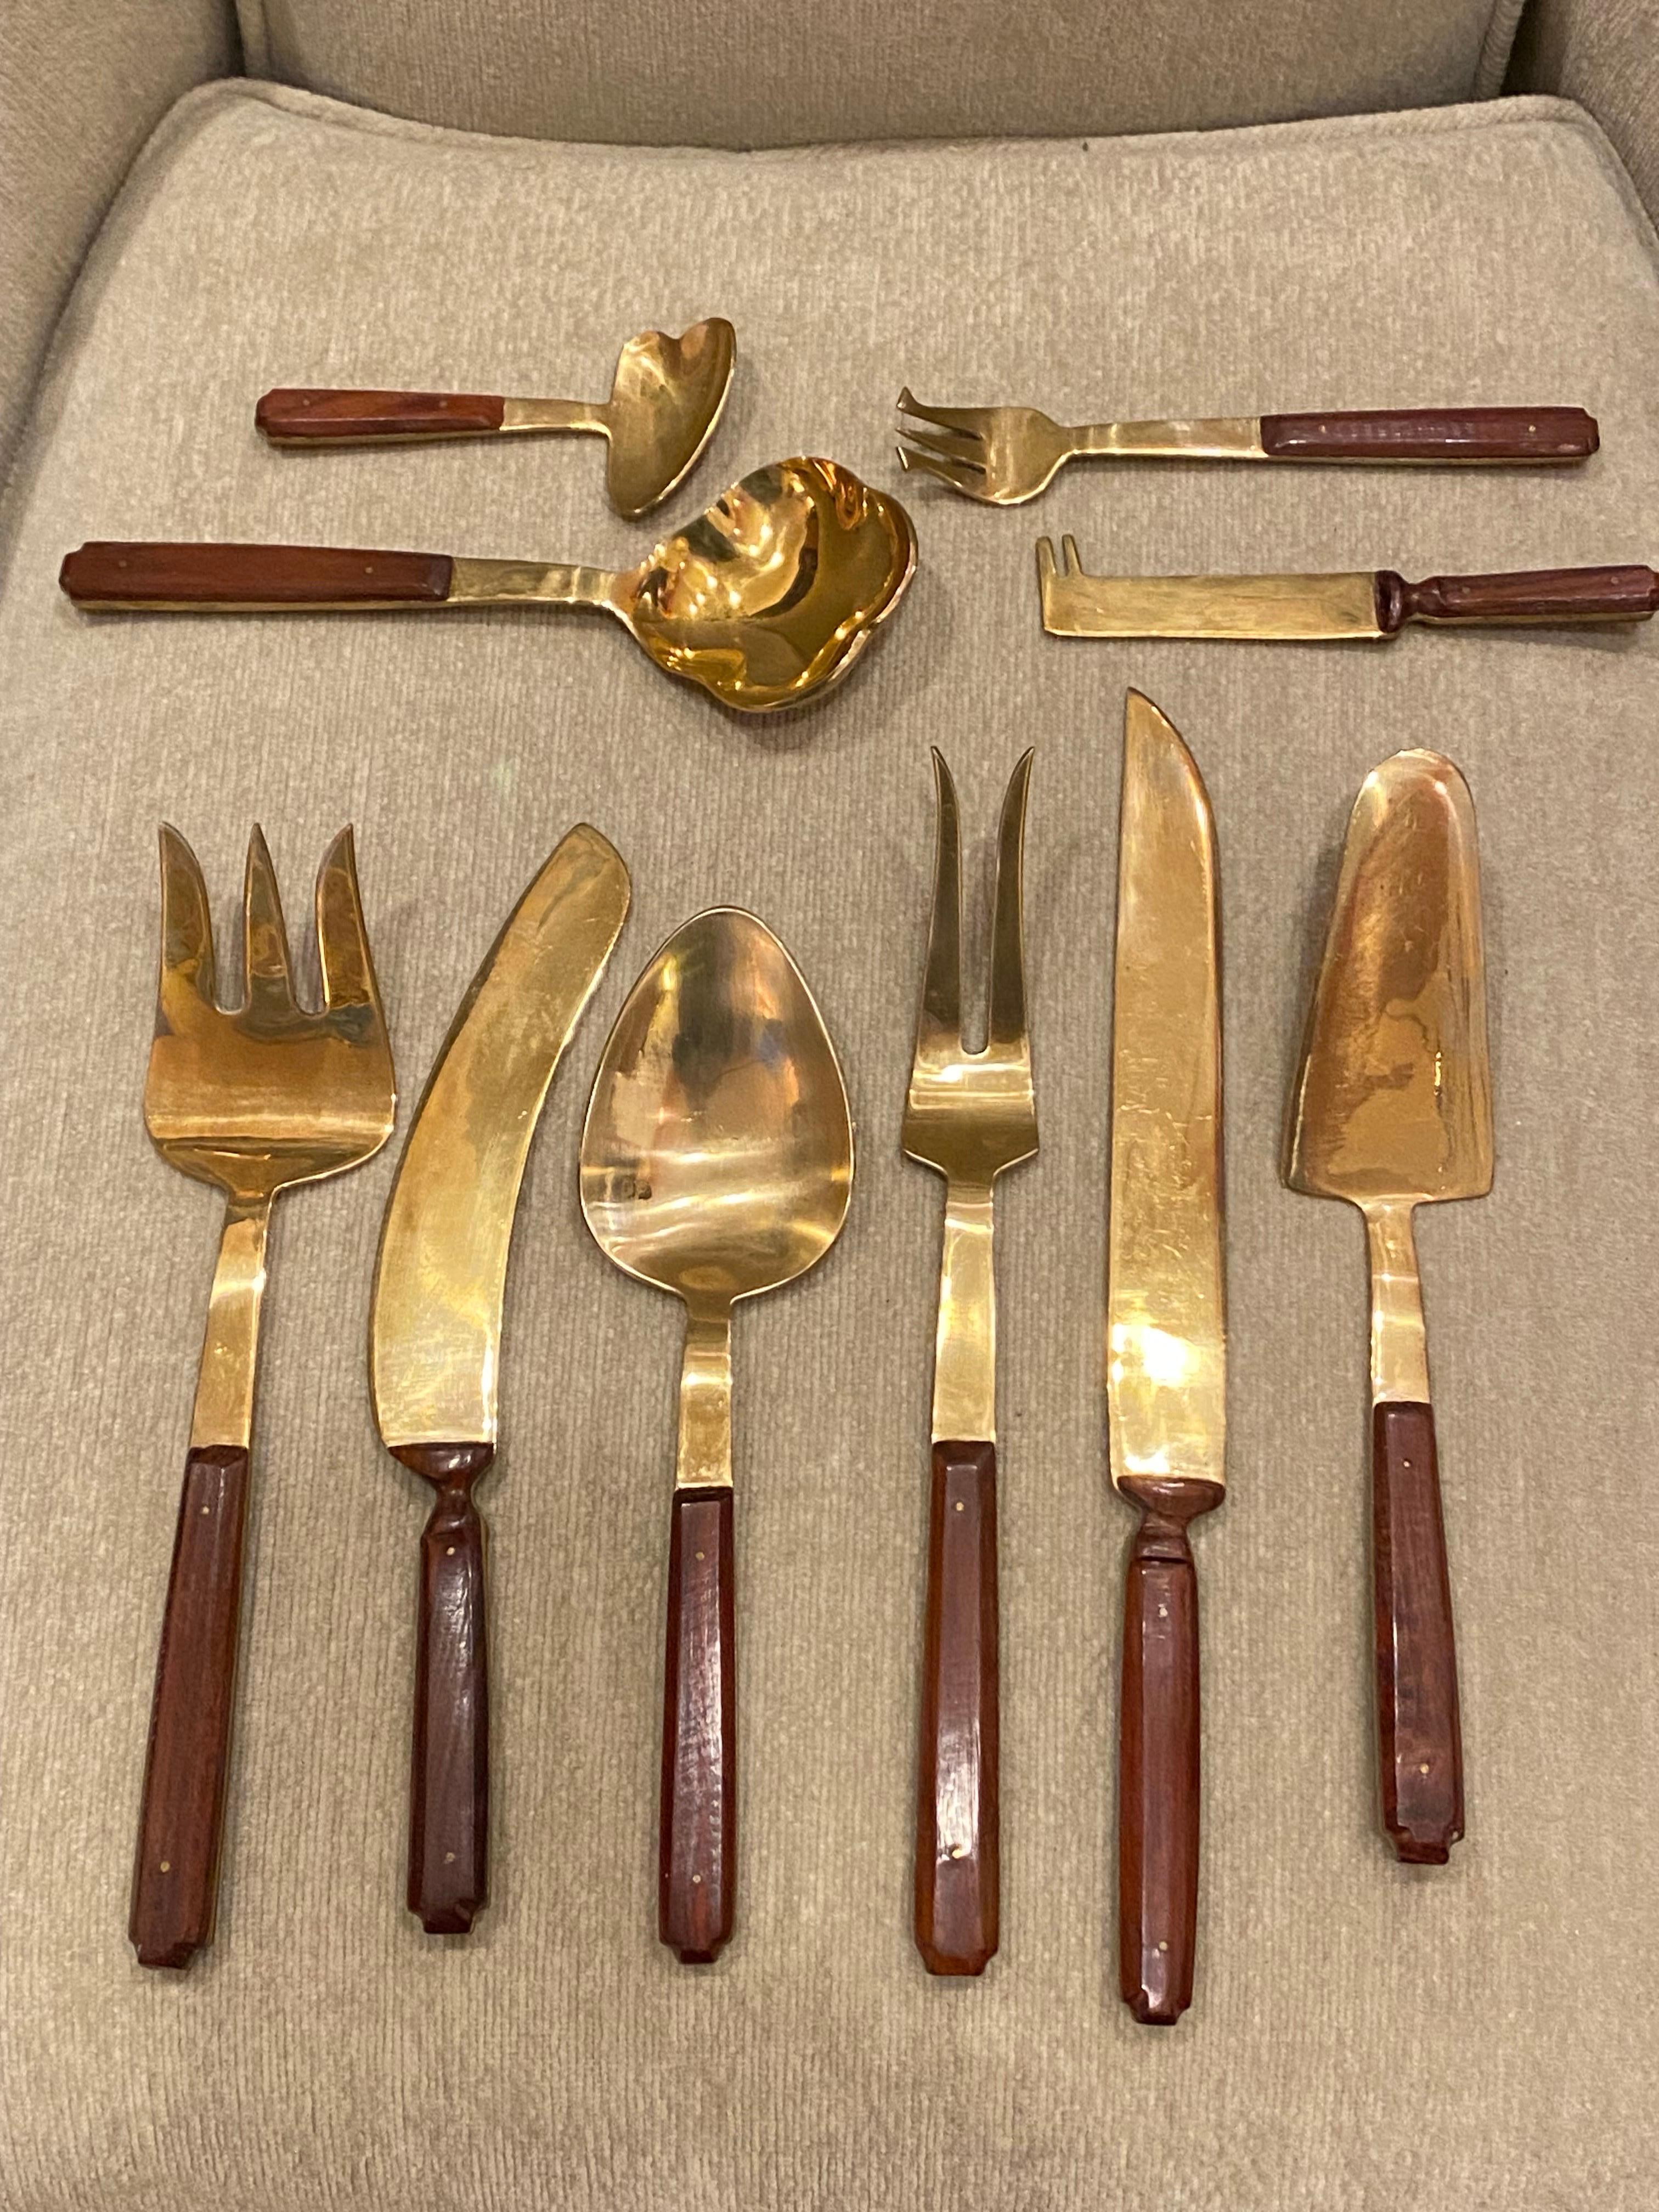 Massive Brass and wood Flatware Set.  142 piece in all! 12 place settings, each place setting includes 11 pieces!  90% of set was unused and still in plastic sleeves.  Some pieces show tarnish, have been lightly cleaning the set and overall in nice